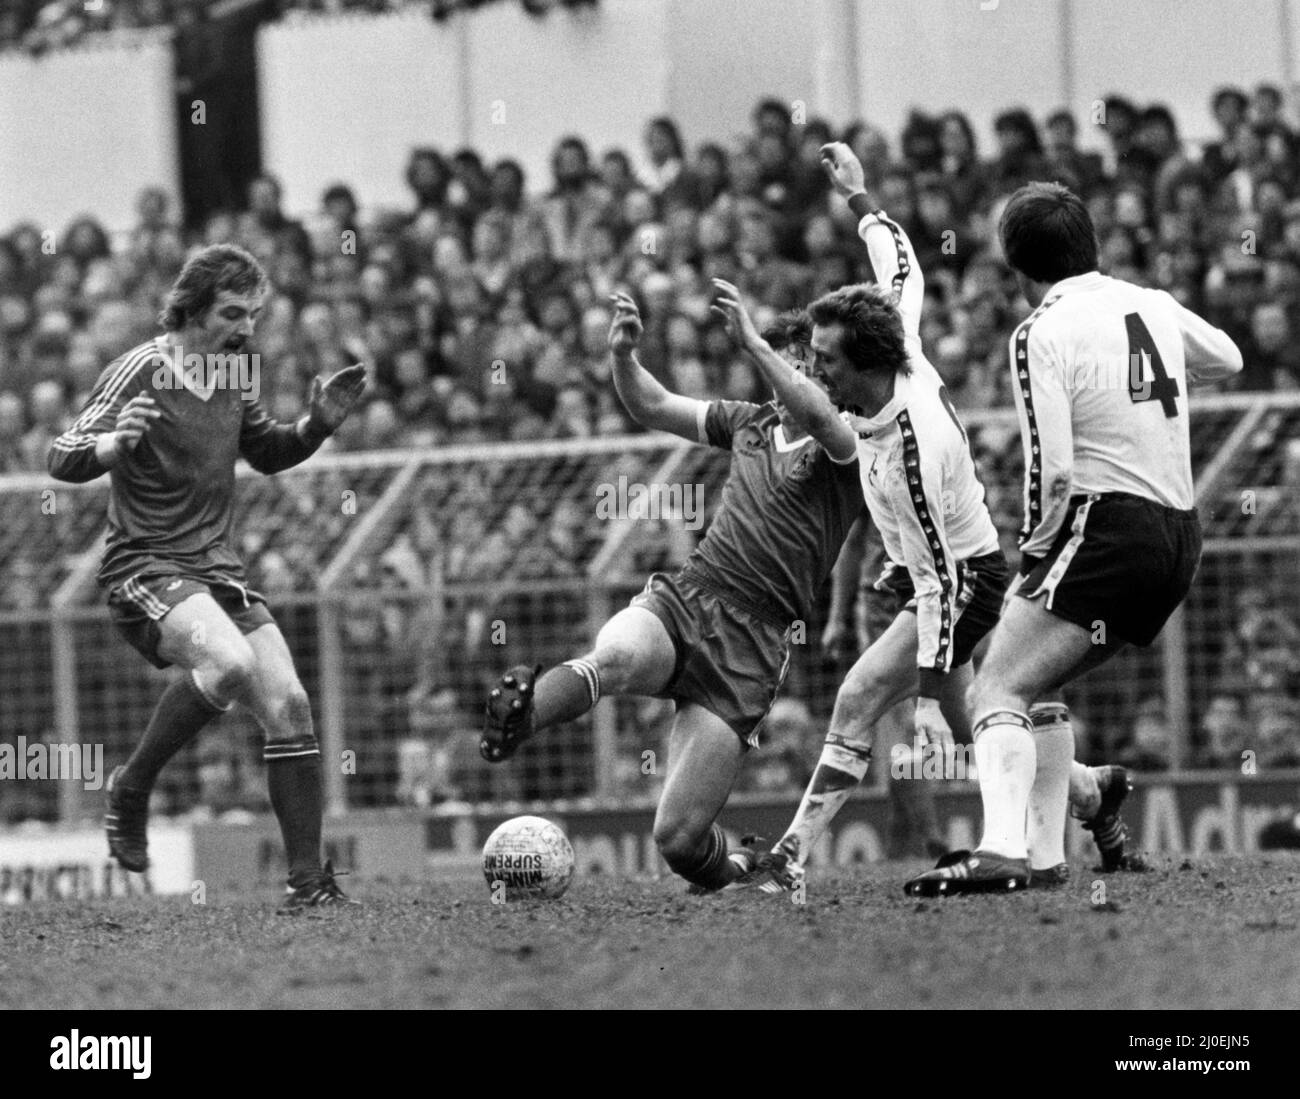 Tottenham Hotspur 1-2 Middlesbrough, Division One match at White Hart Lane, Saturday 7th April 1979. John Mahoney Middlesbrough Football Player (left) clears the ball from Terry Naylor and Jim Holmes (right) Stock Photo